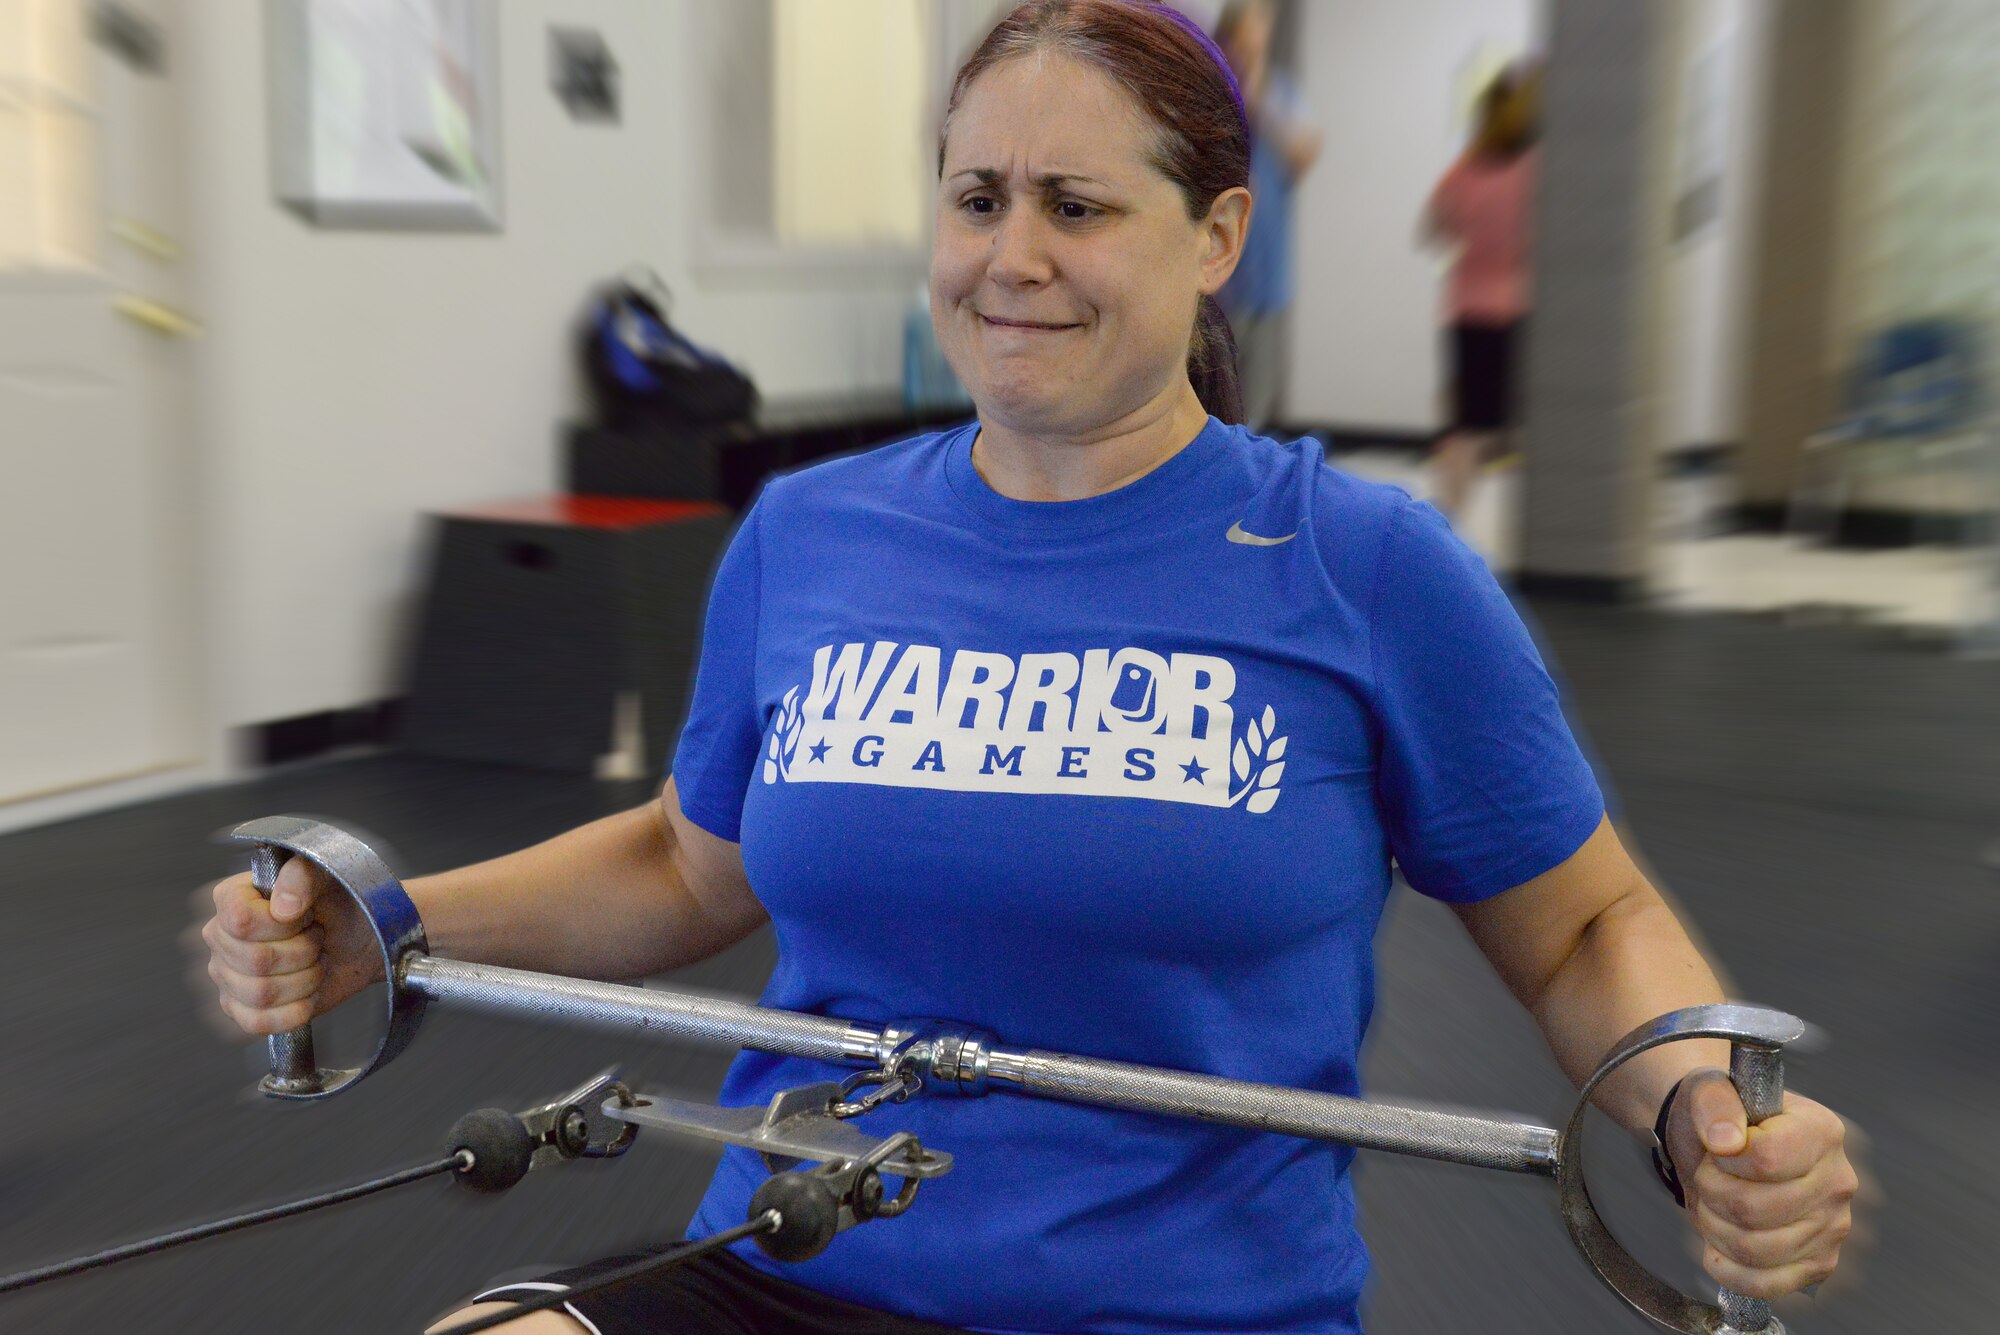 U.S. Air Force retired Maj. Jen Kyseth uses a machine to strengthen her back muscles at the Young Men’s Christian Association to prepare for the Warrior Games, Sumter, S.C., May 8, 2014. Kyseth suffers from chronic back pain resulting from a failed back surgery, also called failed back syndrome, and was chosen to represent the Air Force in the Warrior Games. (U.S. Air Force photo by Airman 1st Class Diana M. Cossaboom/Released)